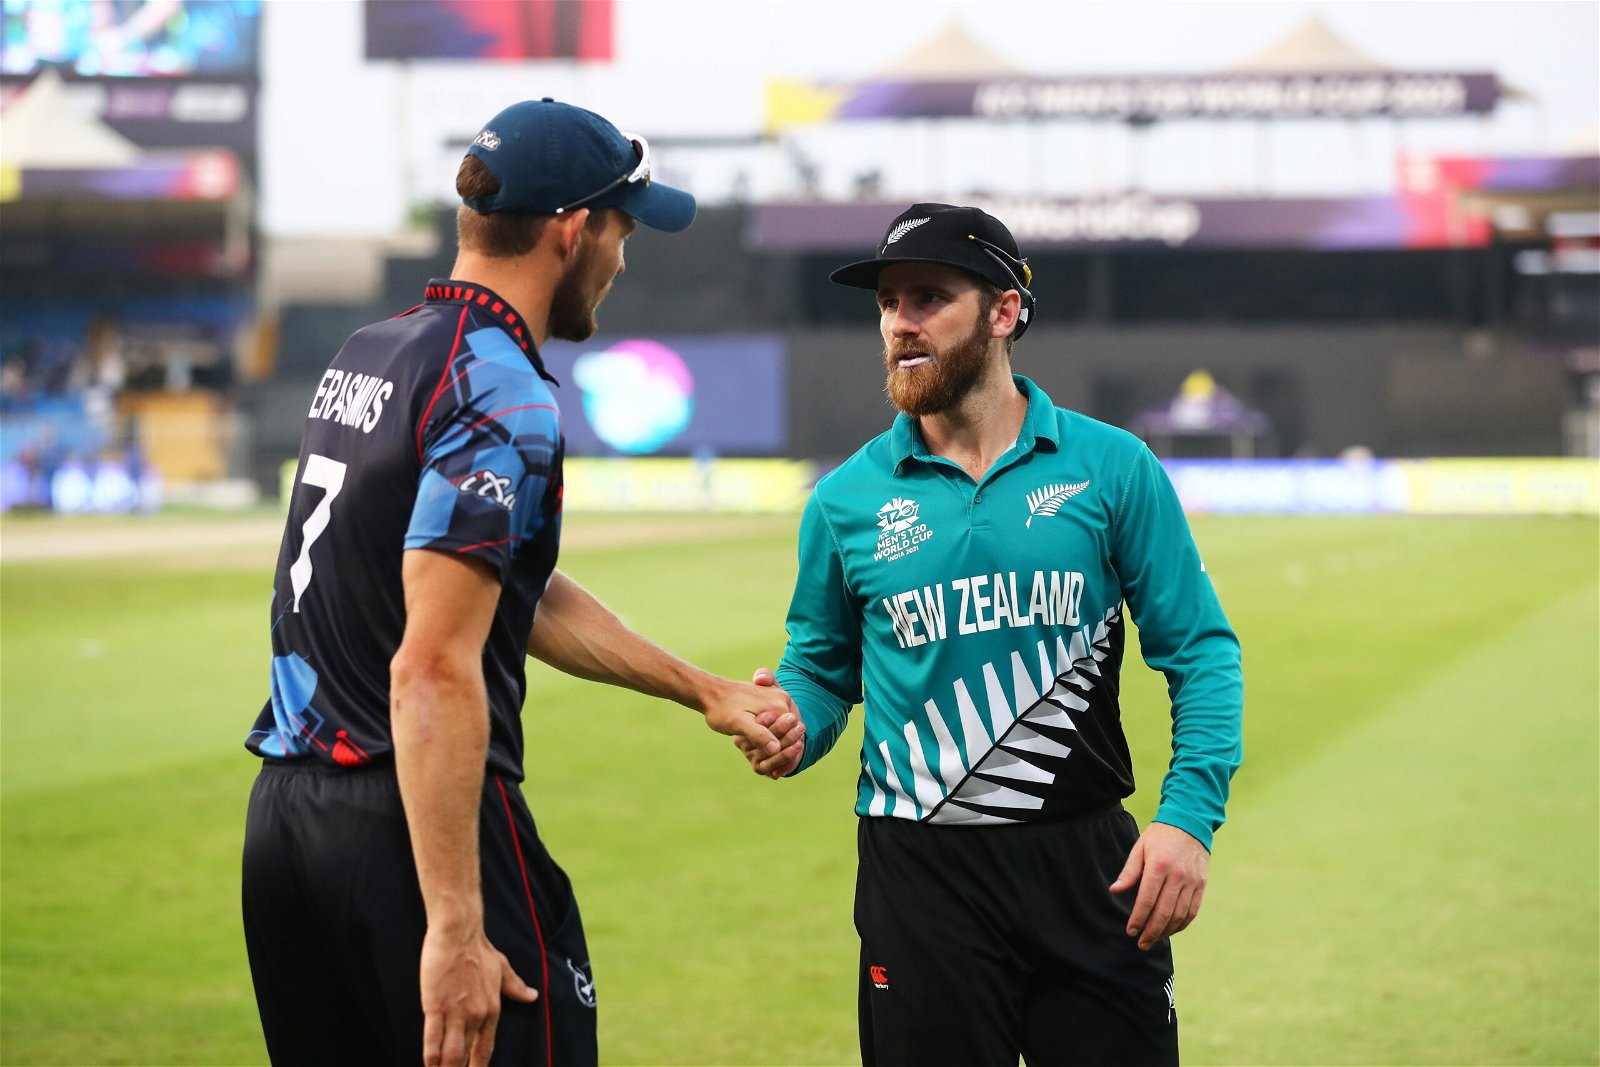 New Zealand vs Namibia, ICC T20 World Cup 2021